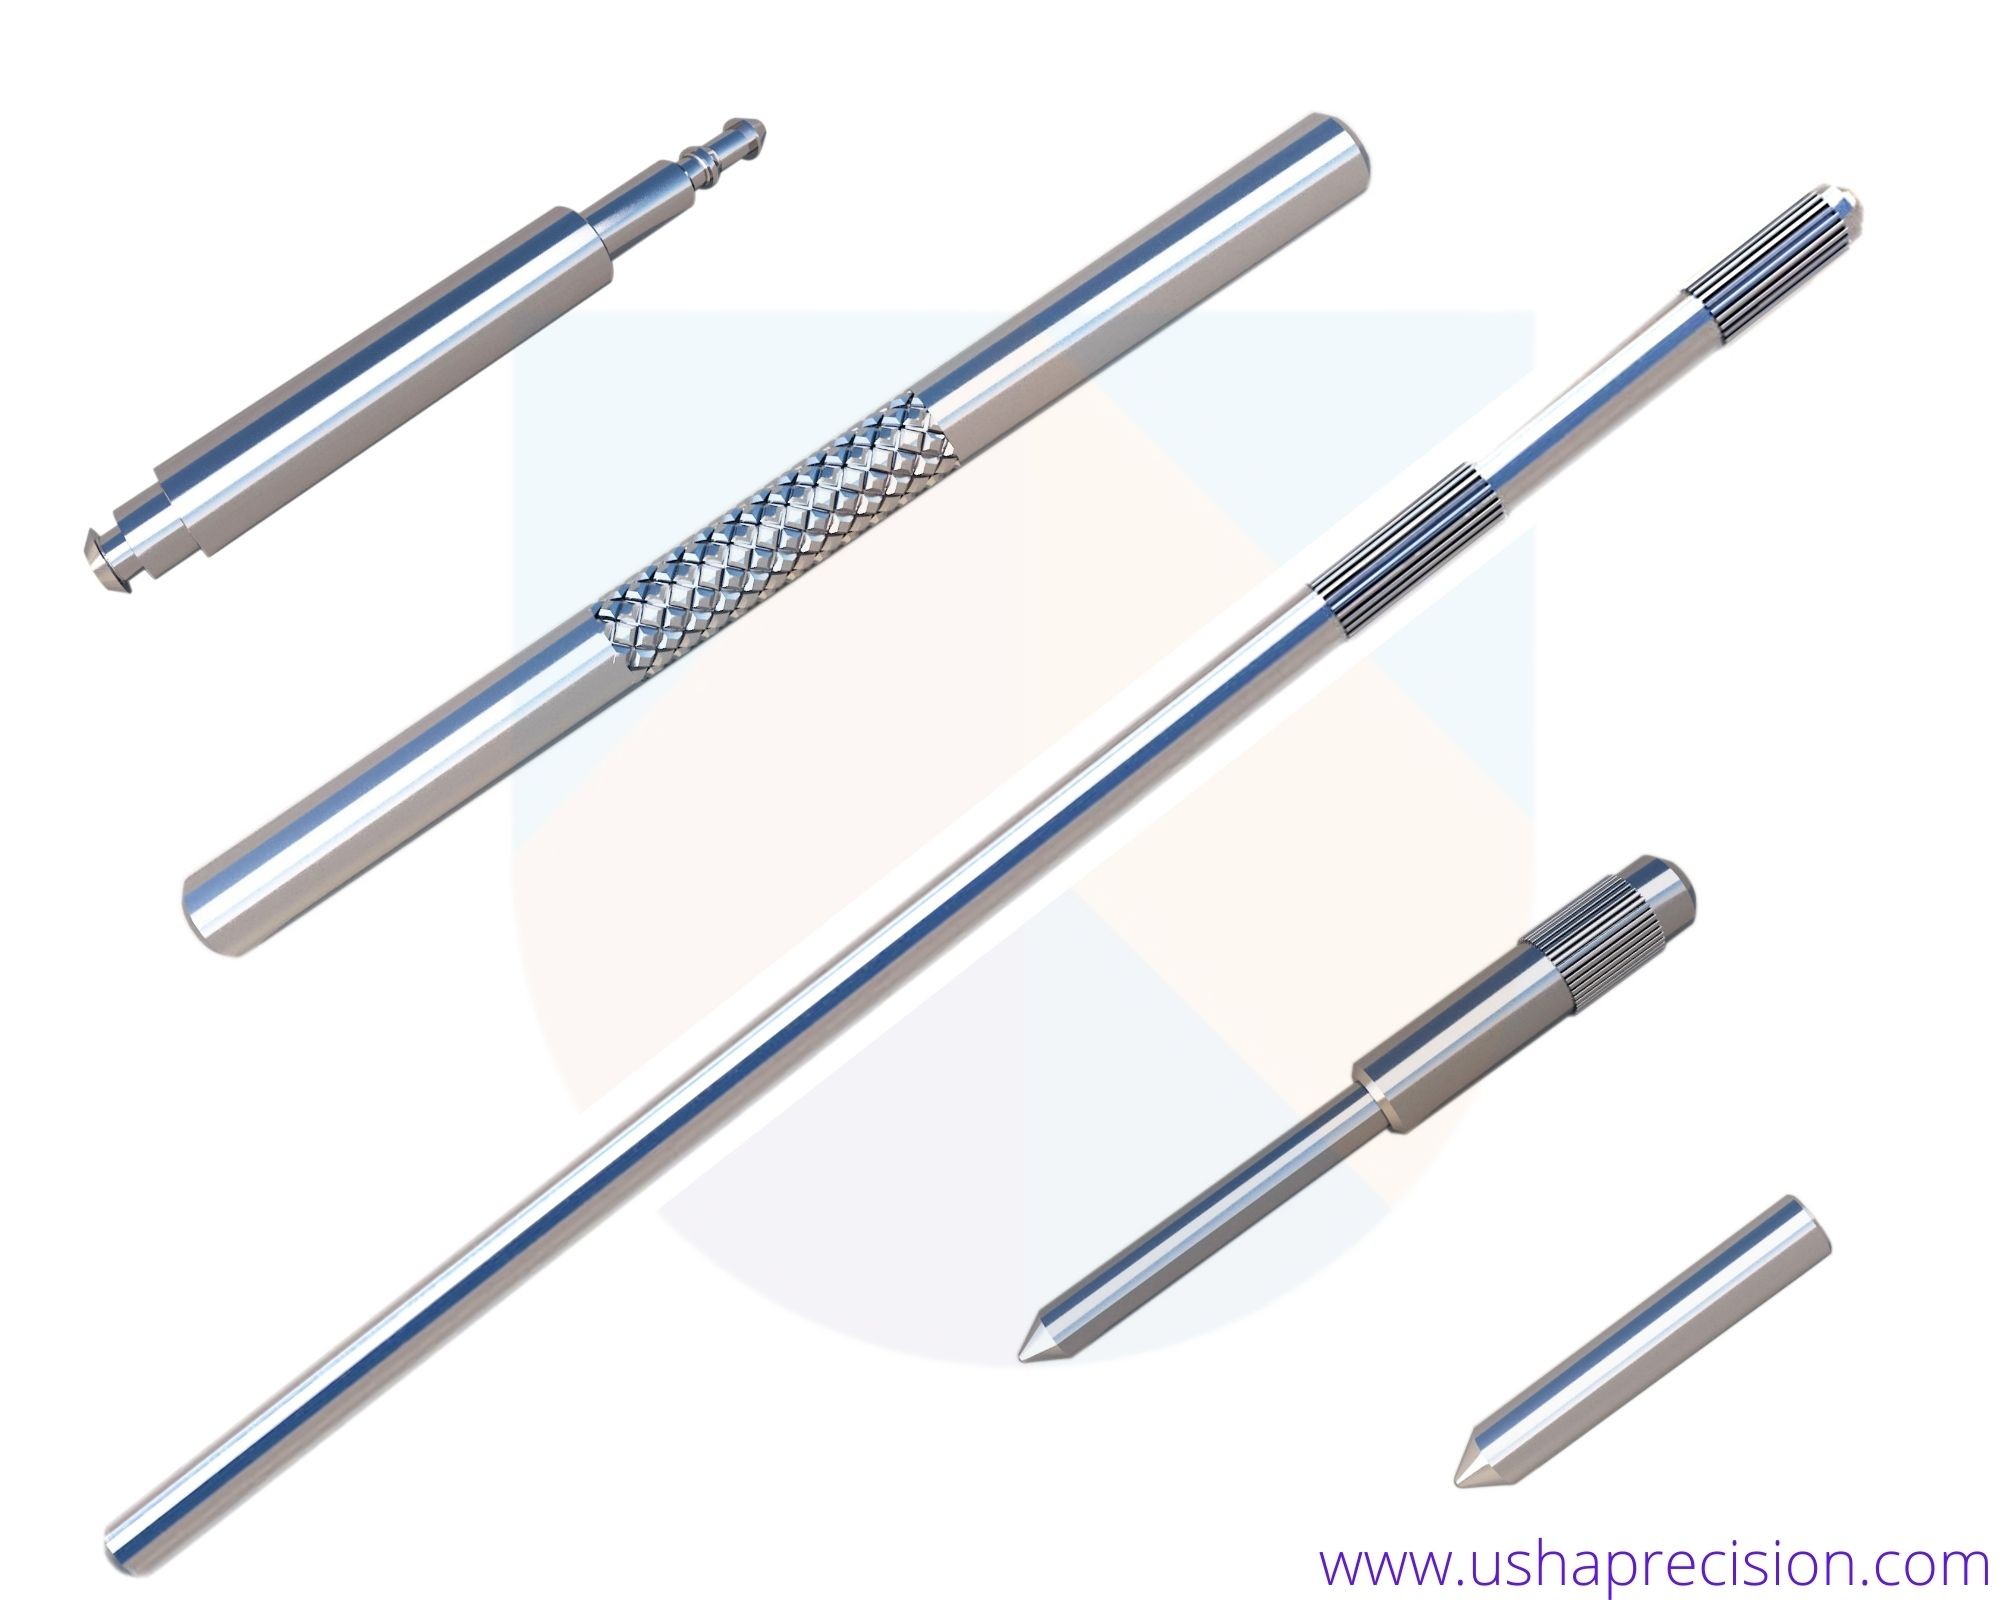 Wide Range of Precision Turned Components